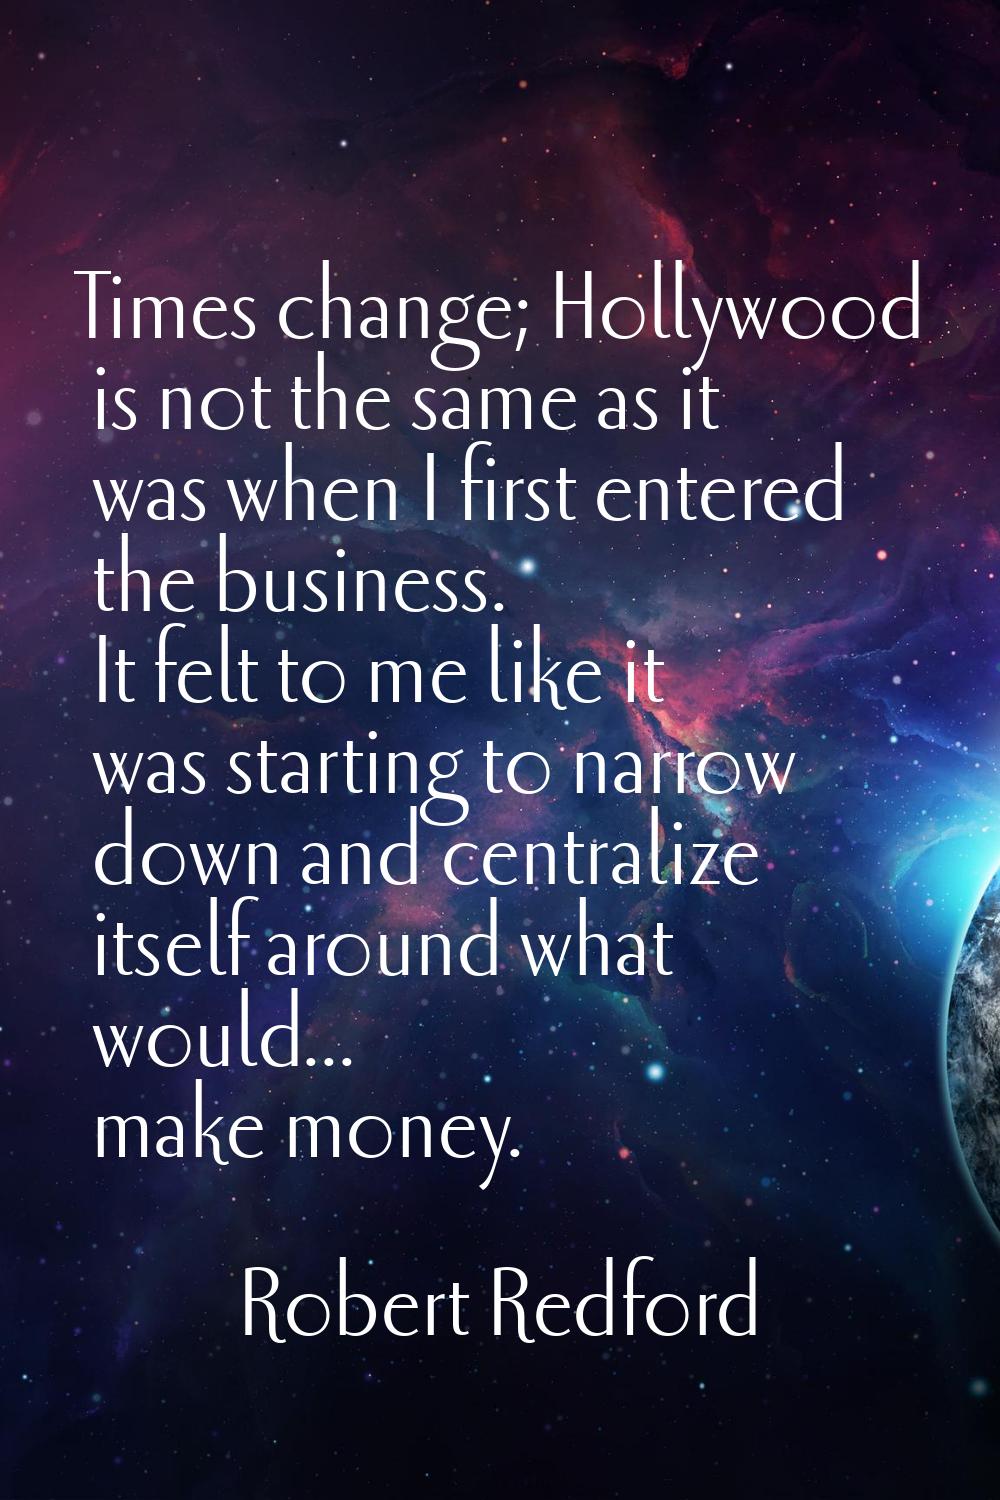 Times change; Hollywood is not the same as it was when I first entered the business. It felt to me 